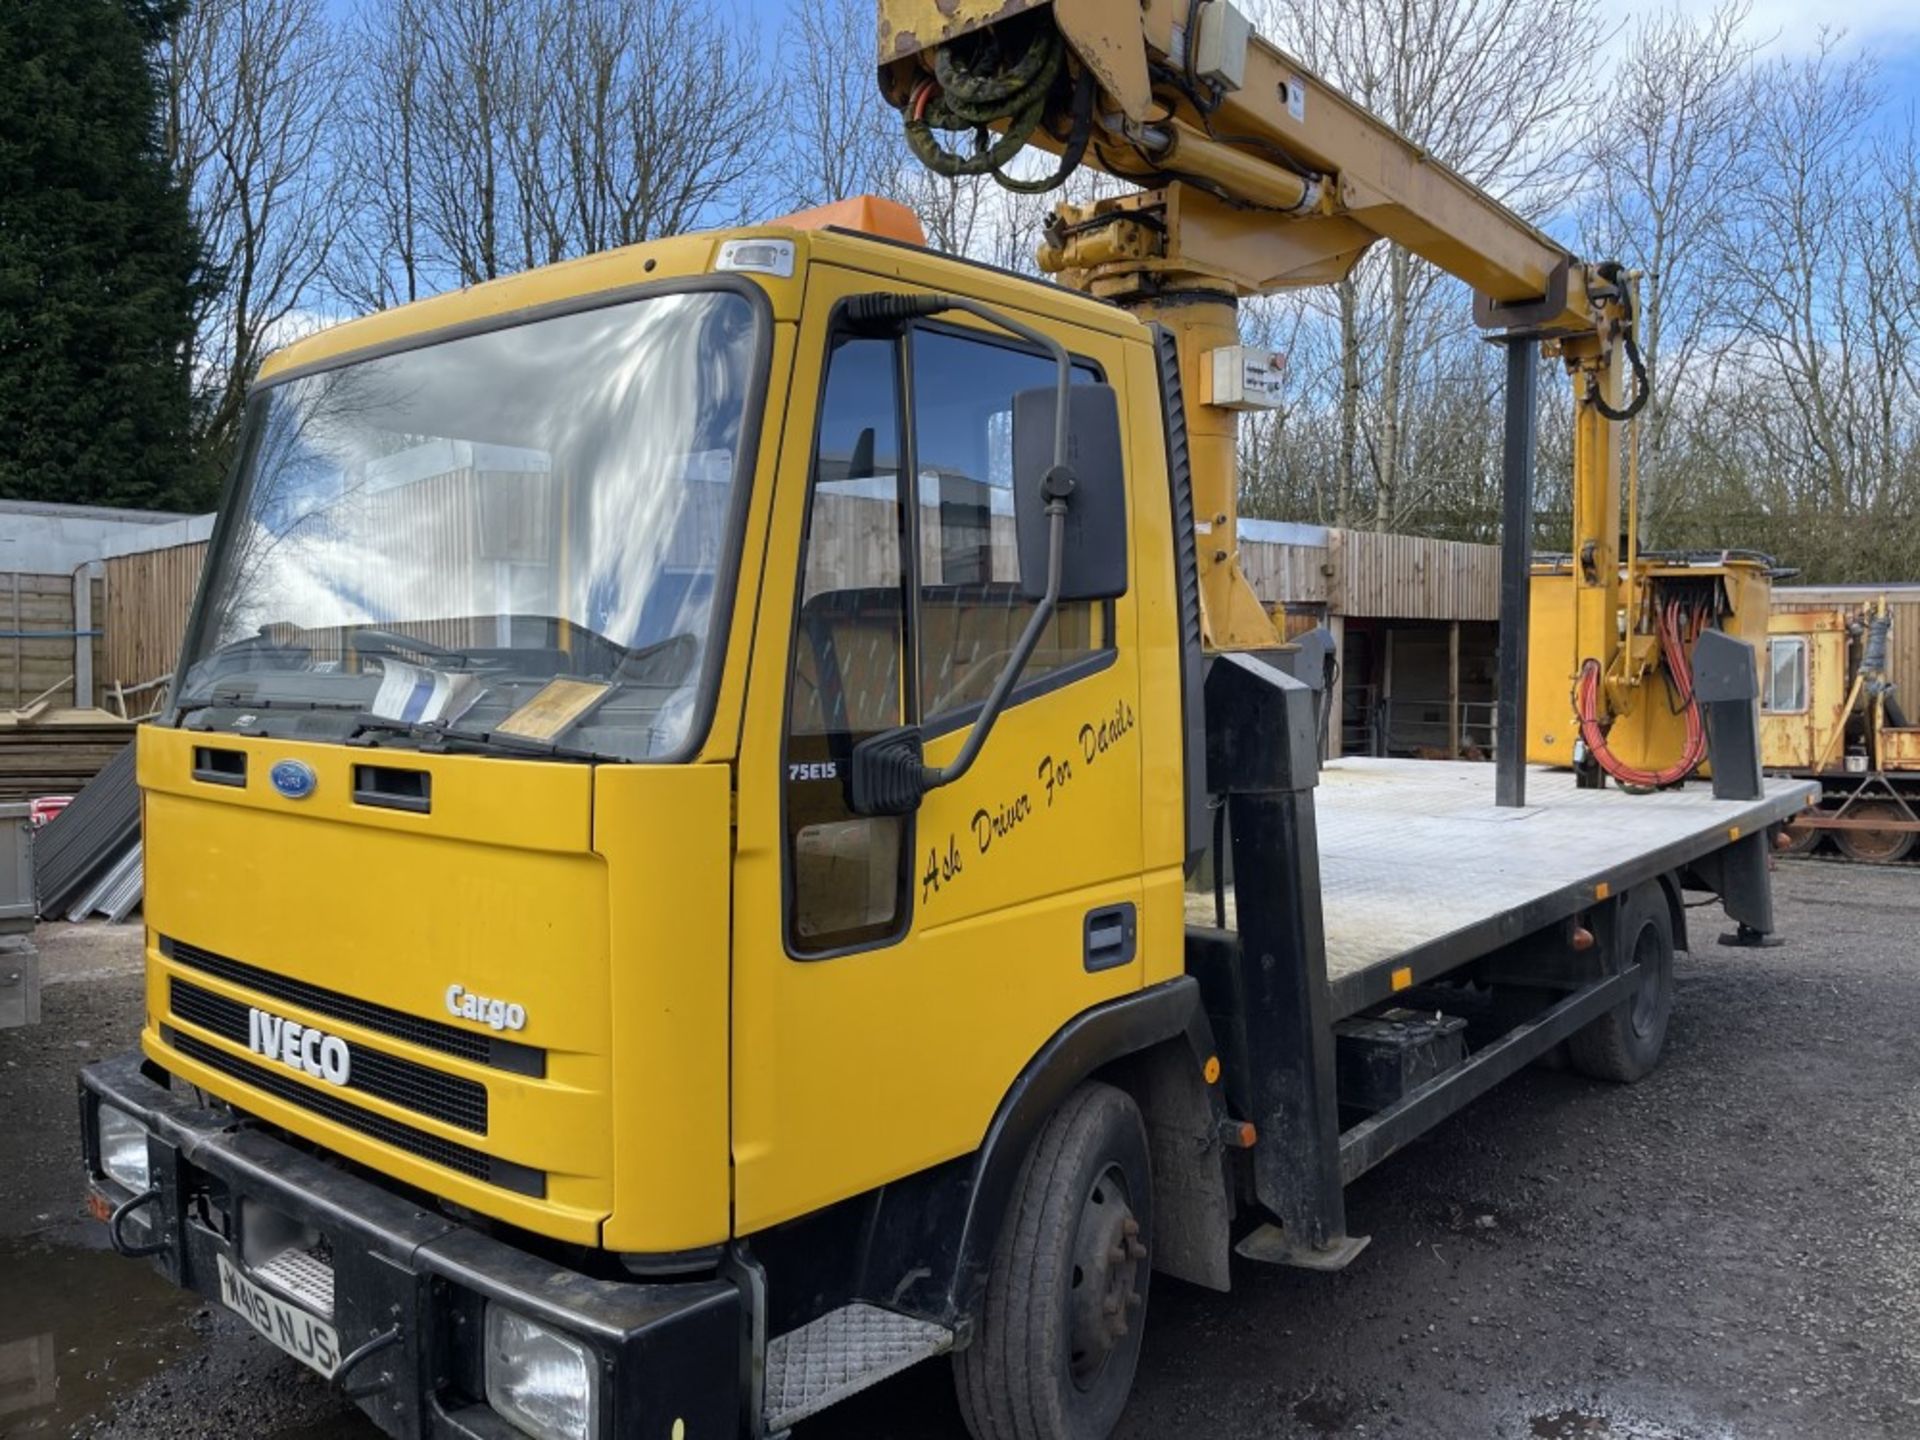 W reg FORD IVECO CHERRY PICKER (LOCATION BLACKBURN) 1ST REG 02/00, V5 HERE (RING FOR COLLECTION